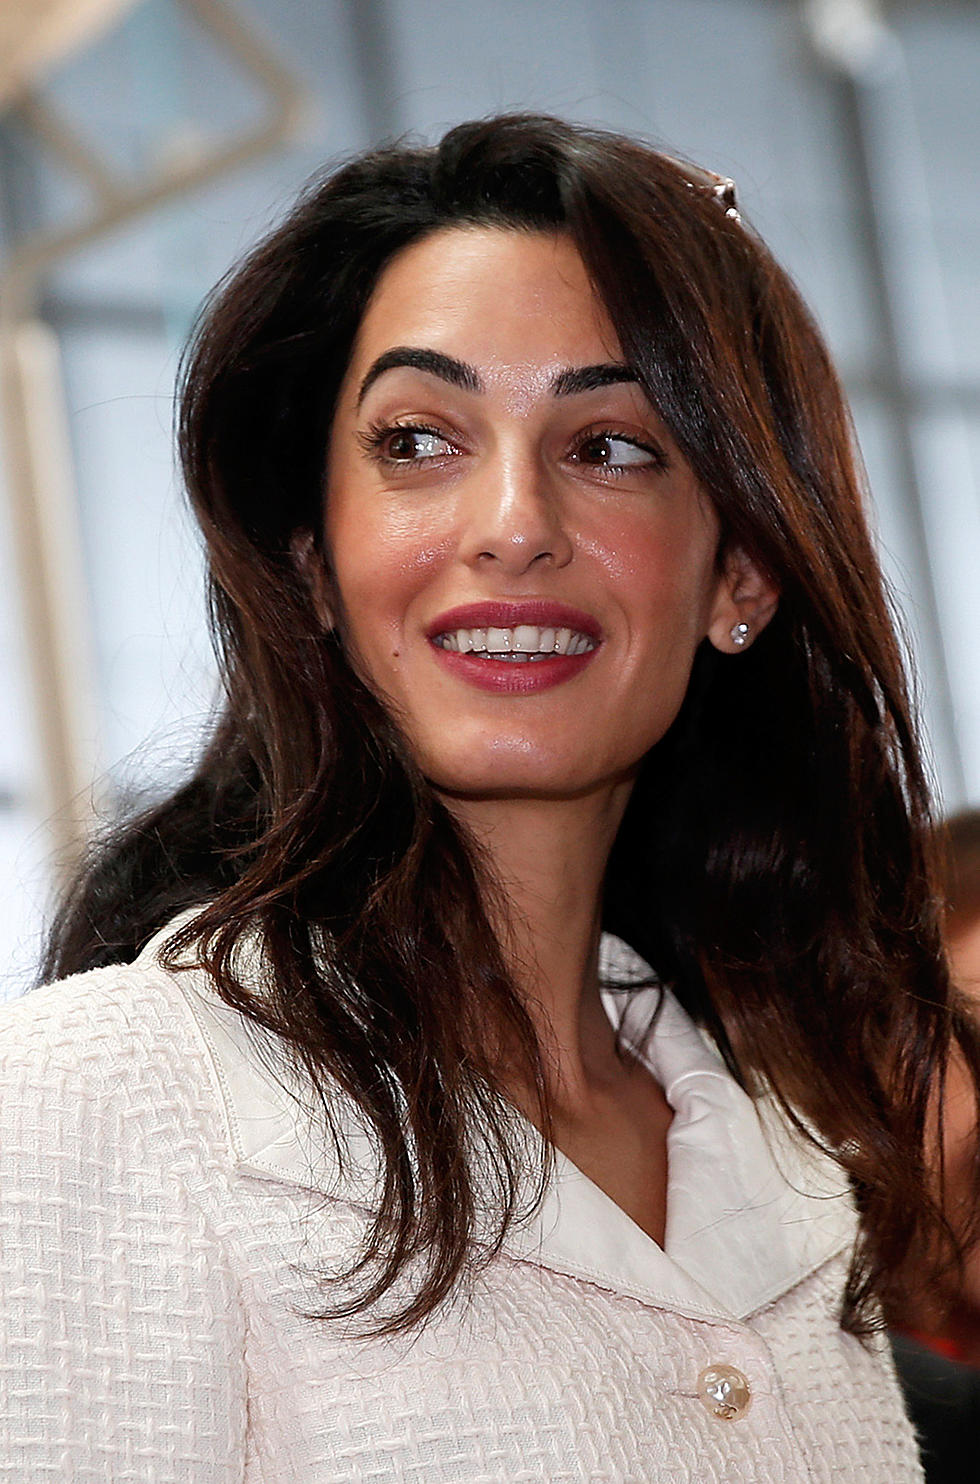 Amal Alamuddin Clooney Is the Most Fascinating Person of 2014